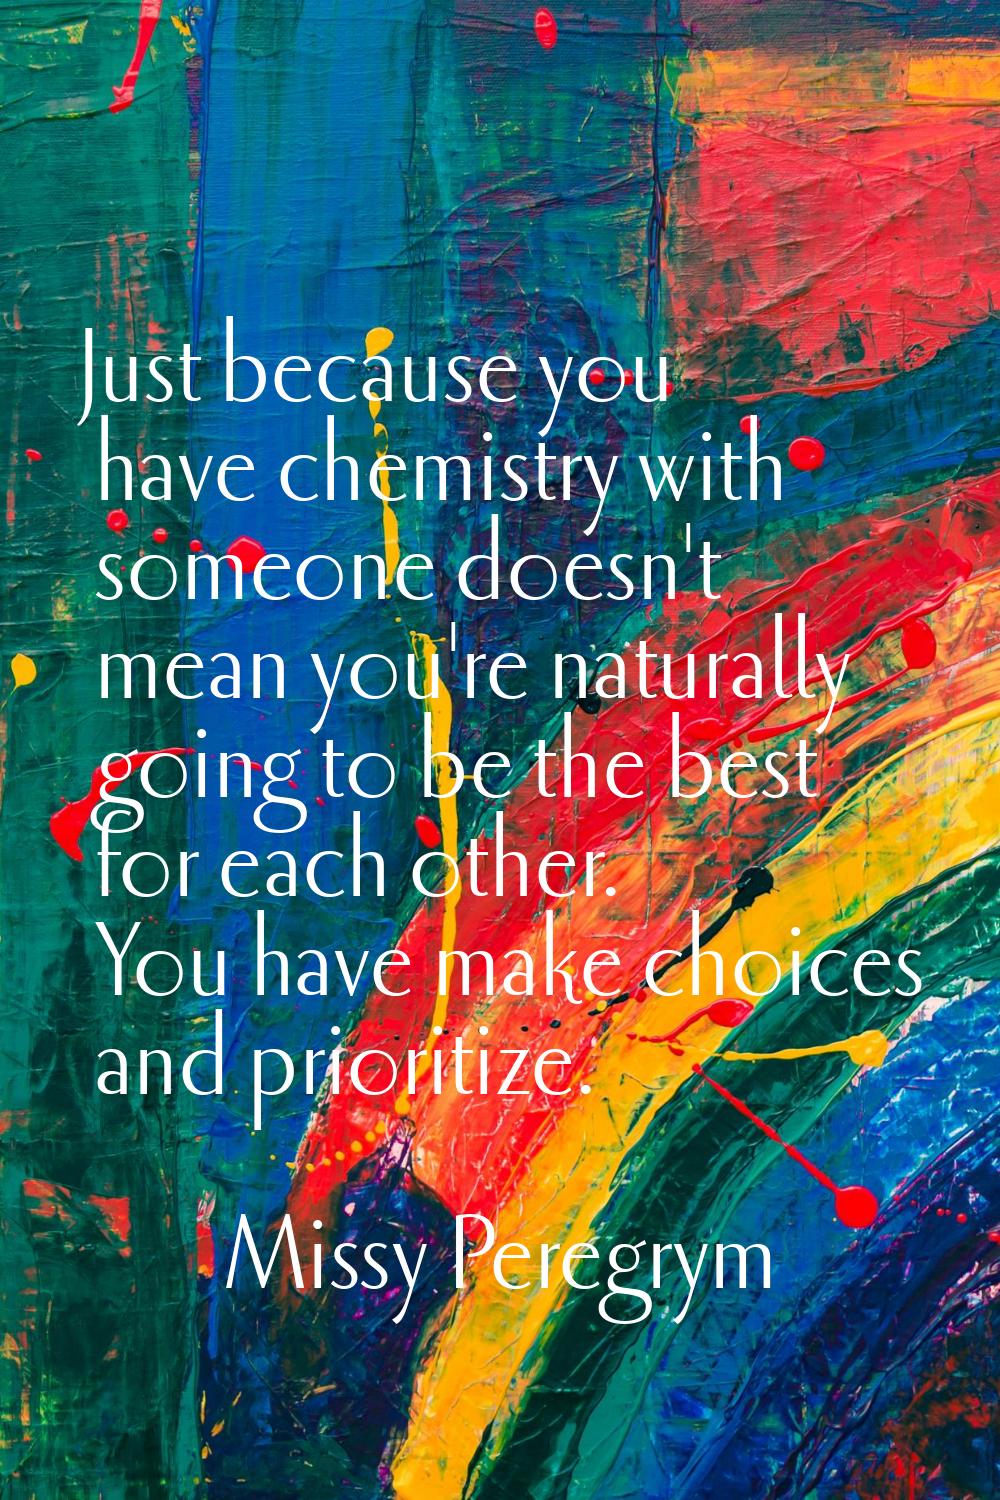 Just because you have chemistry with someone doesn't mean you're naturally going to be the best for